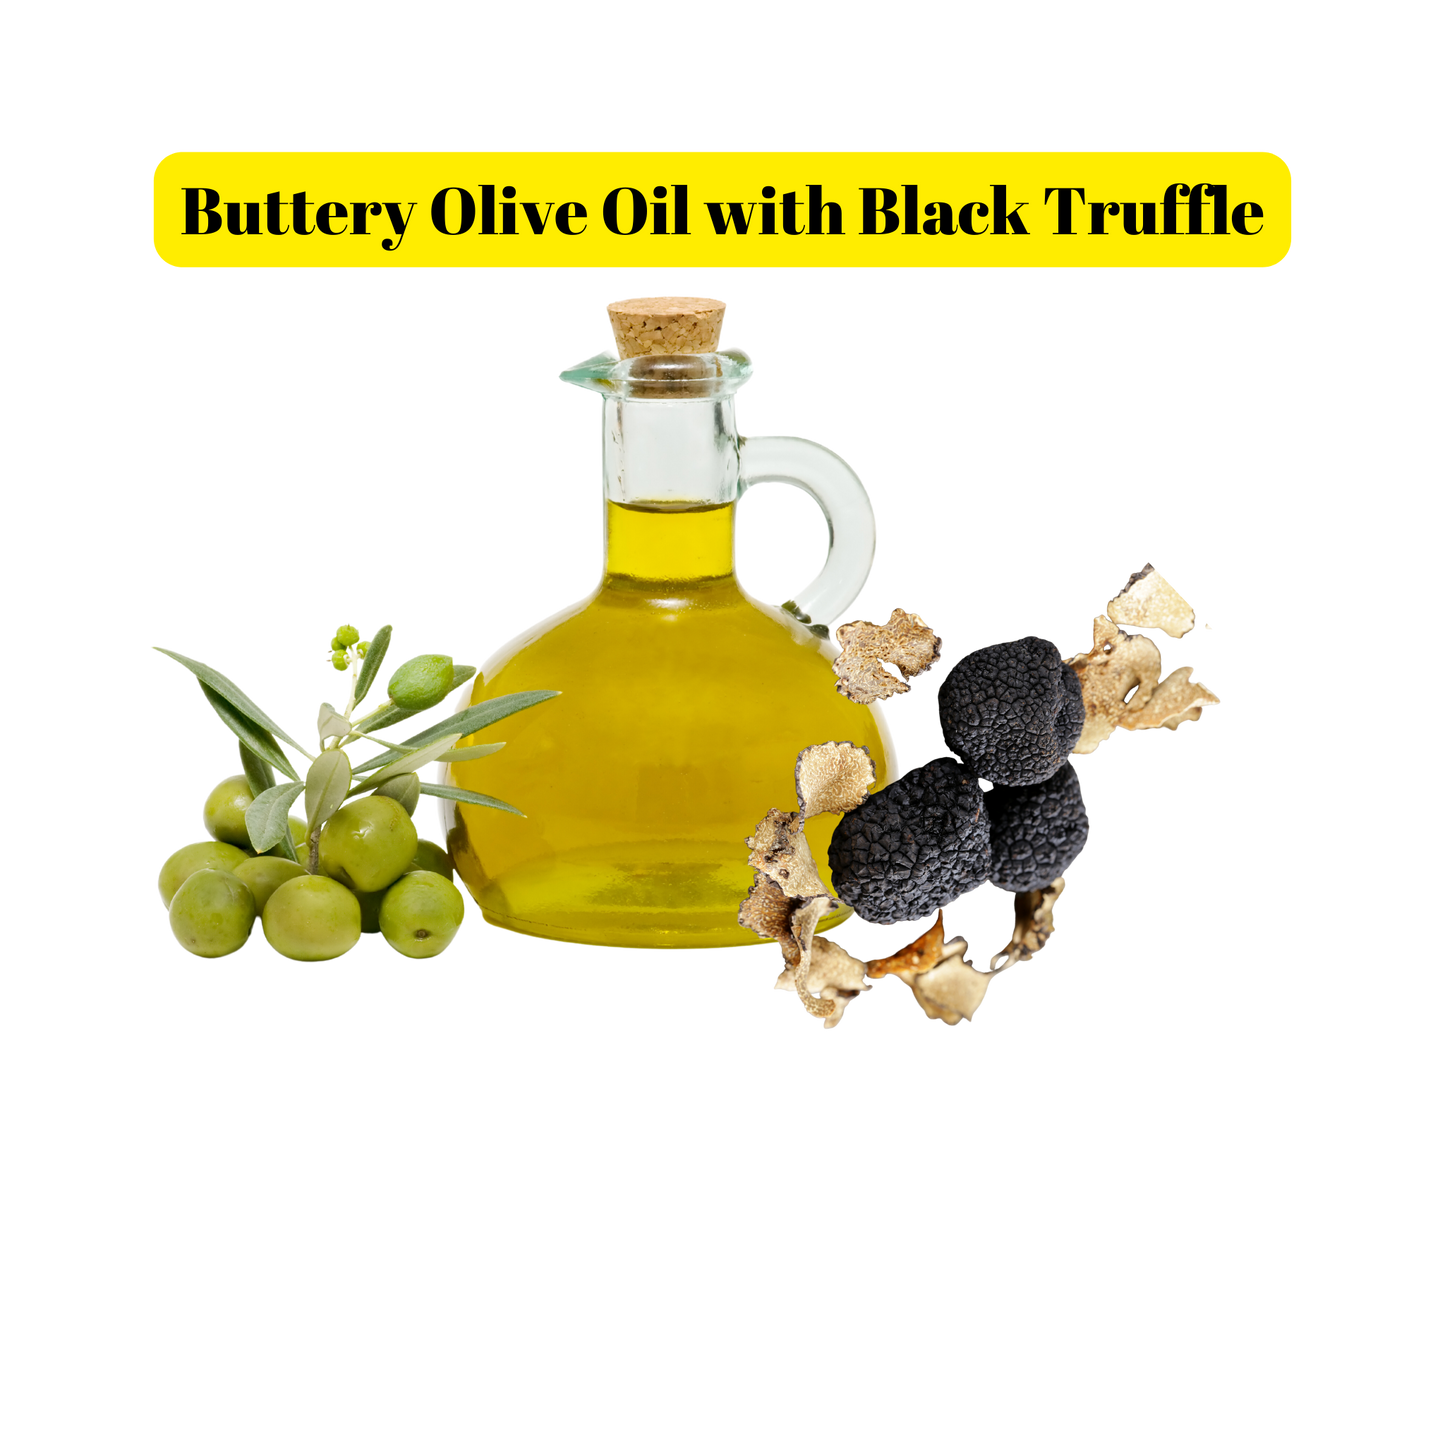 Buttery Olive Oil with Black Truffle Salt